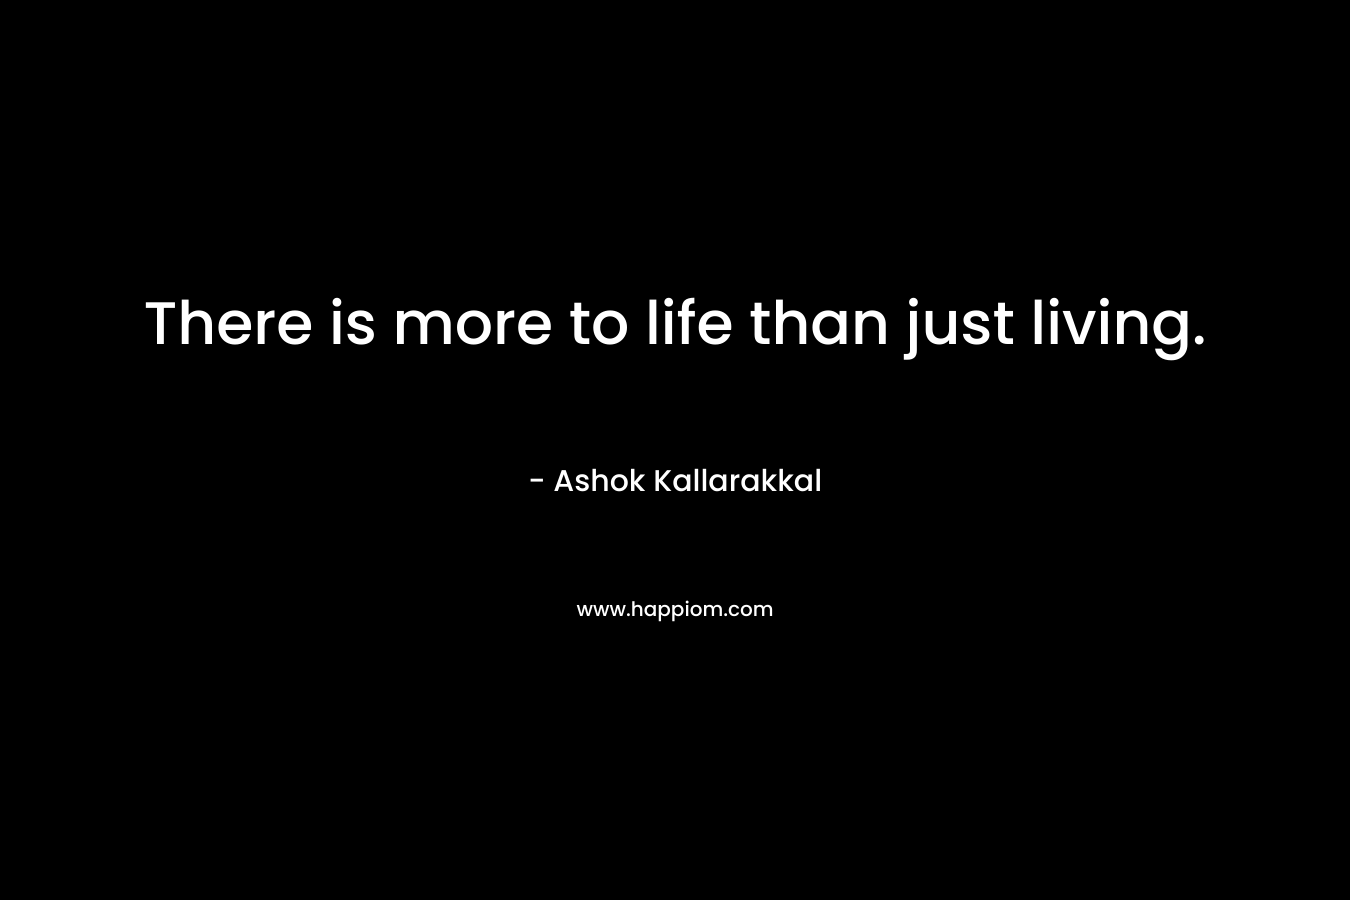 There is more to life than just living.